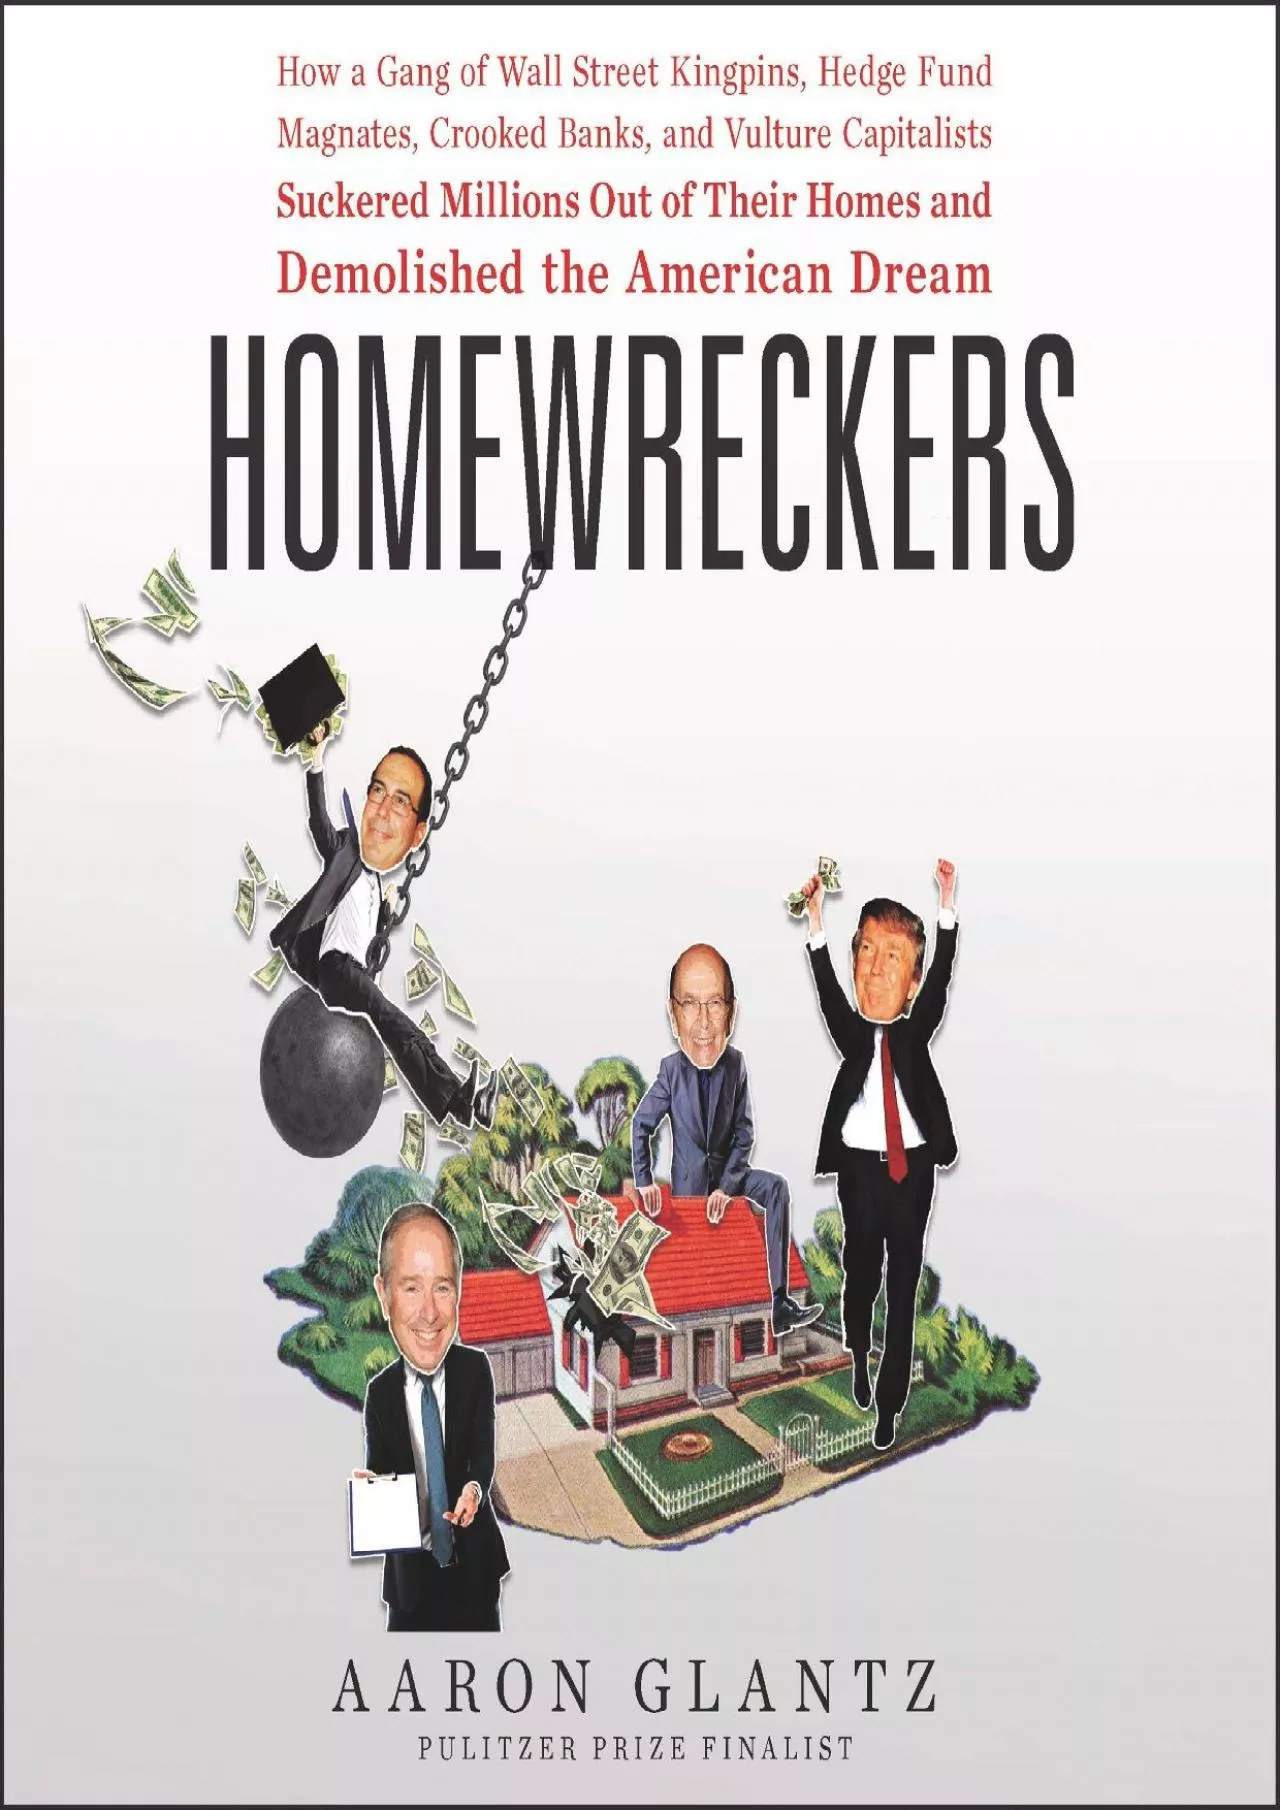 (BOOK)-Homewreckers: How a Gang of Wall Street Kingpins, Hedge Fund Magnates, Crooked